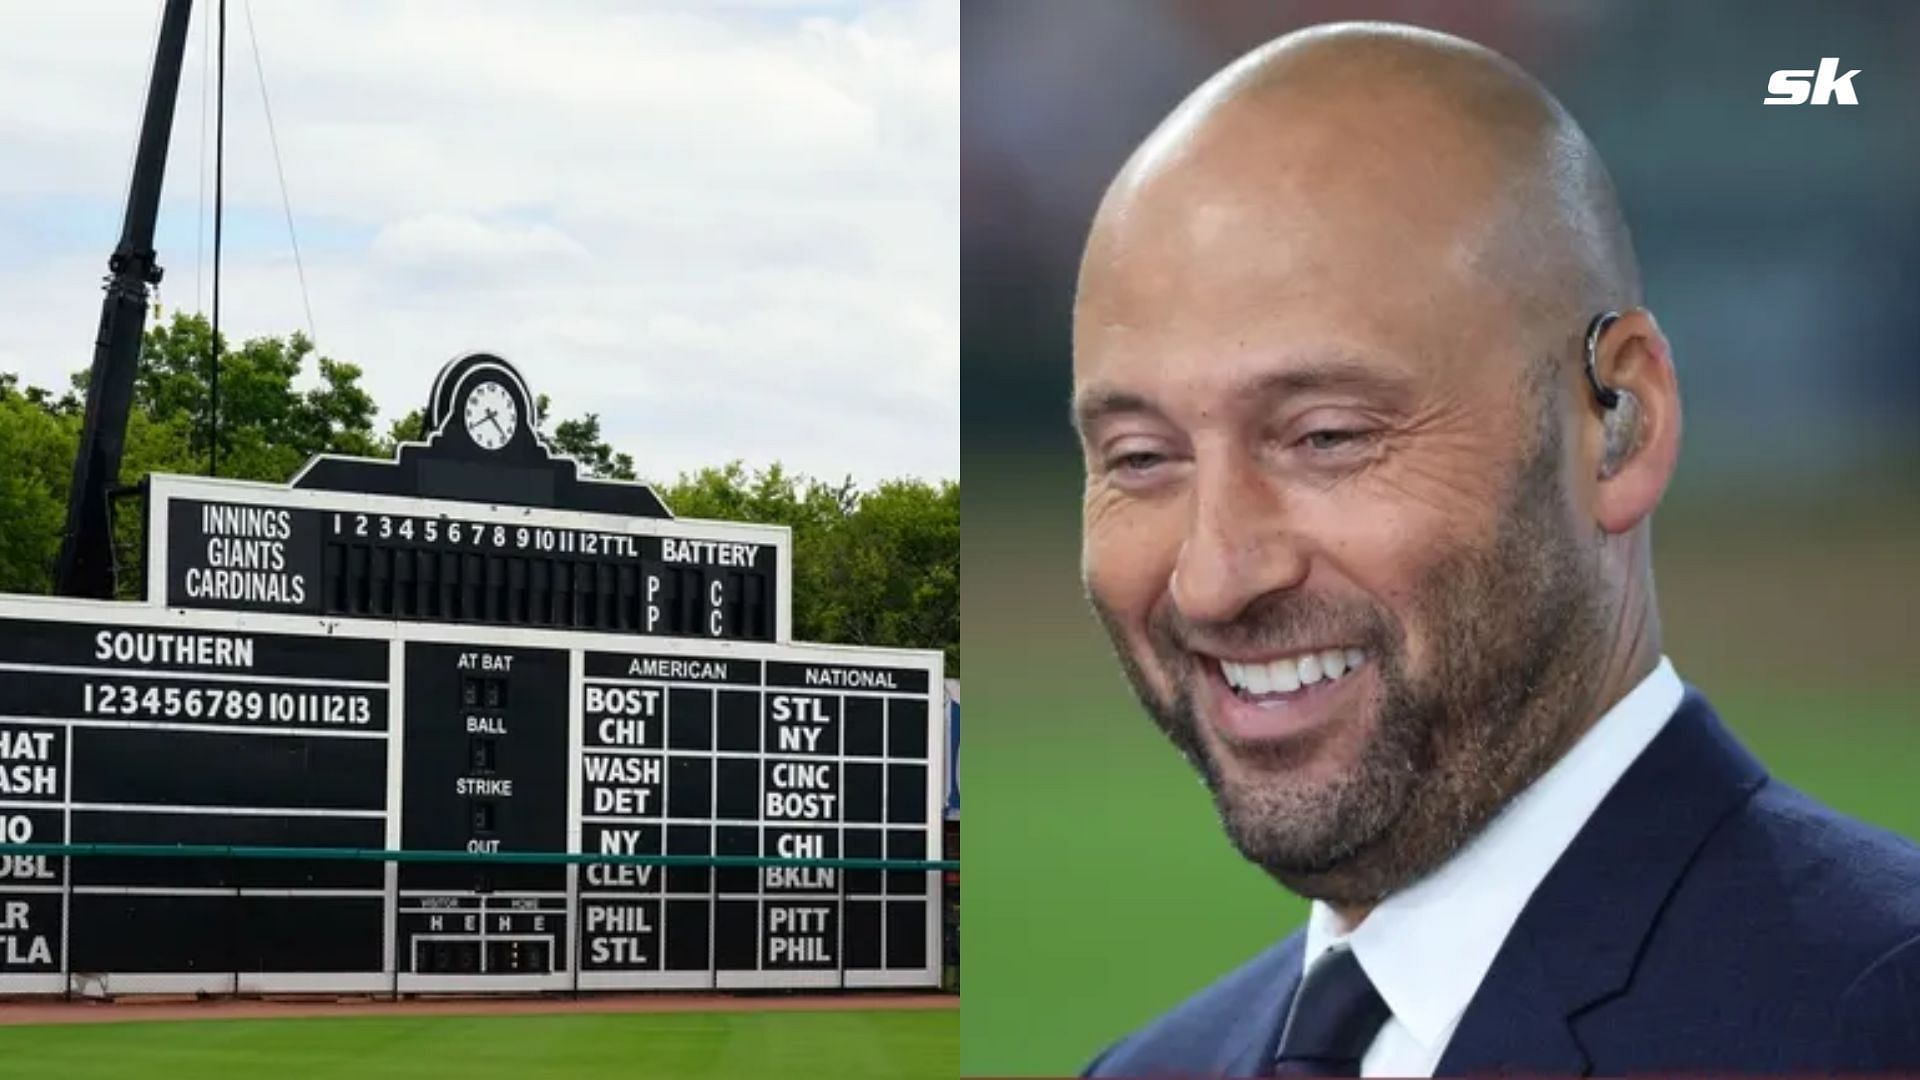 In Photos: Yankees legend Derek Jeter shares moment with father at historic Rickwood Field as MLB honors the Negro Leagues